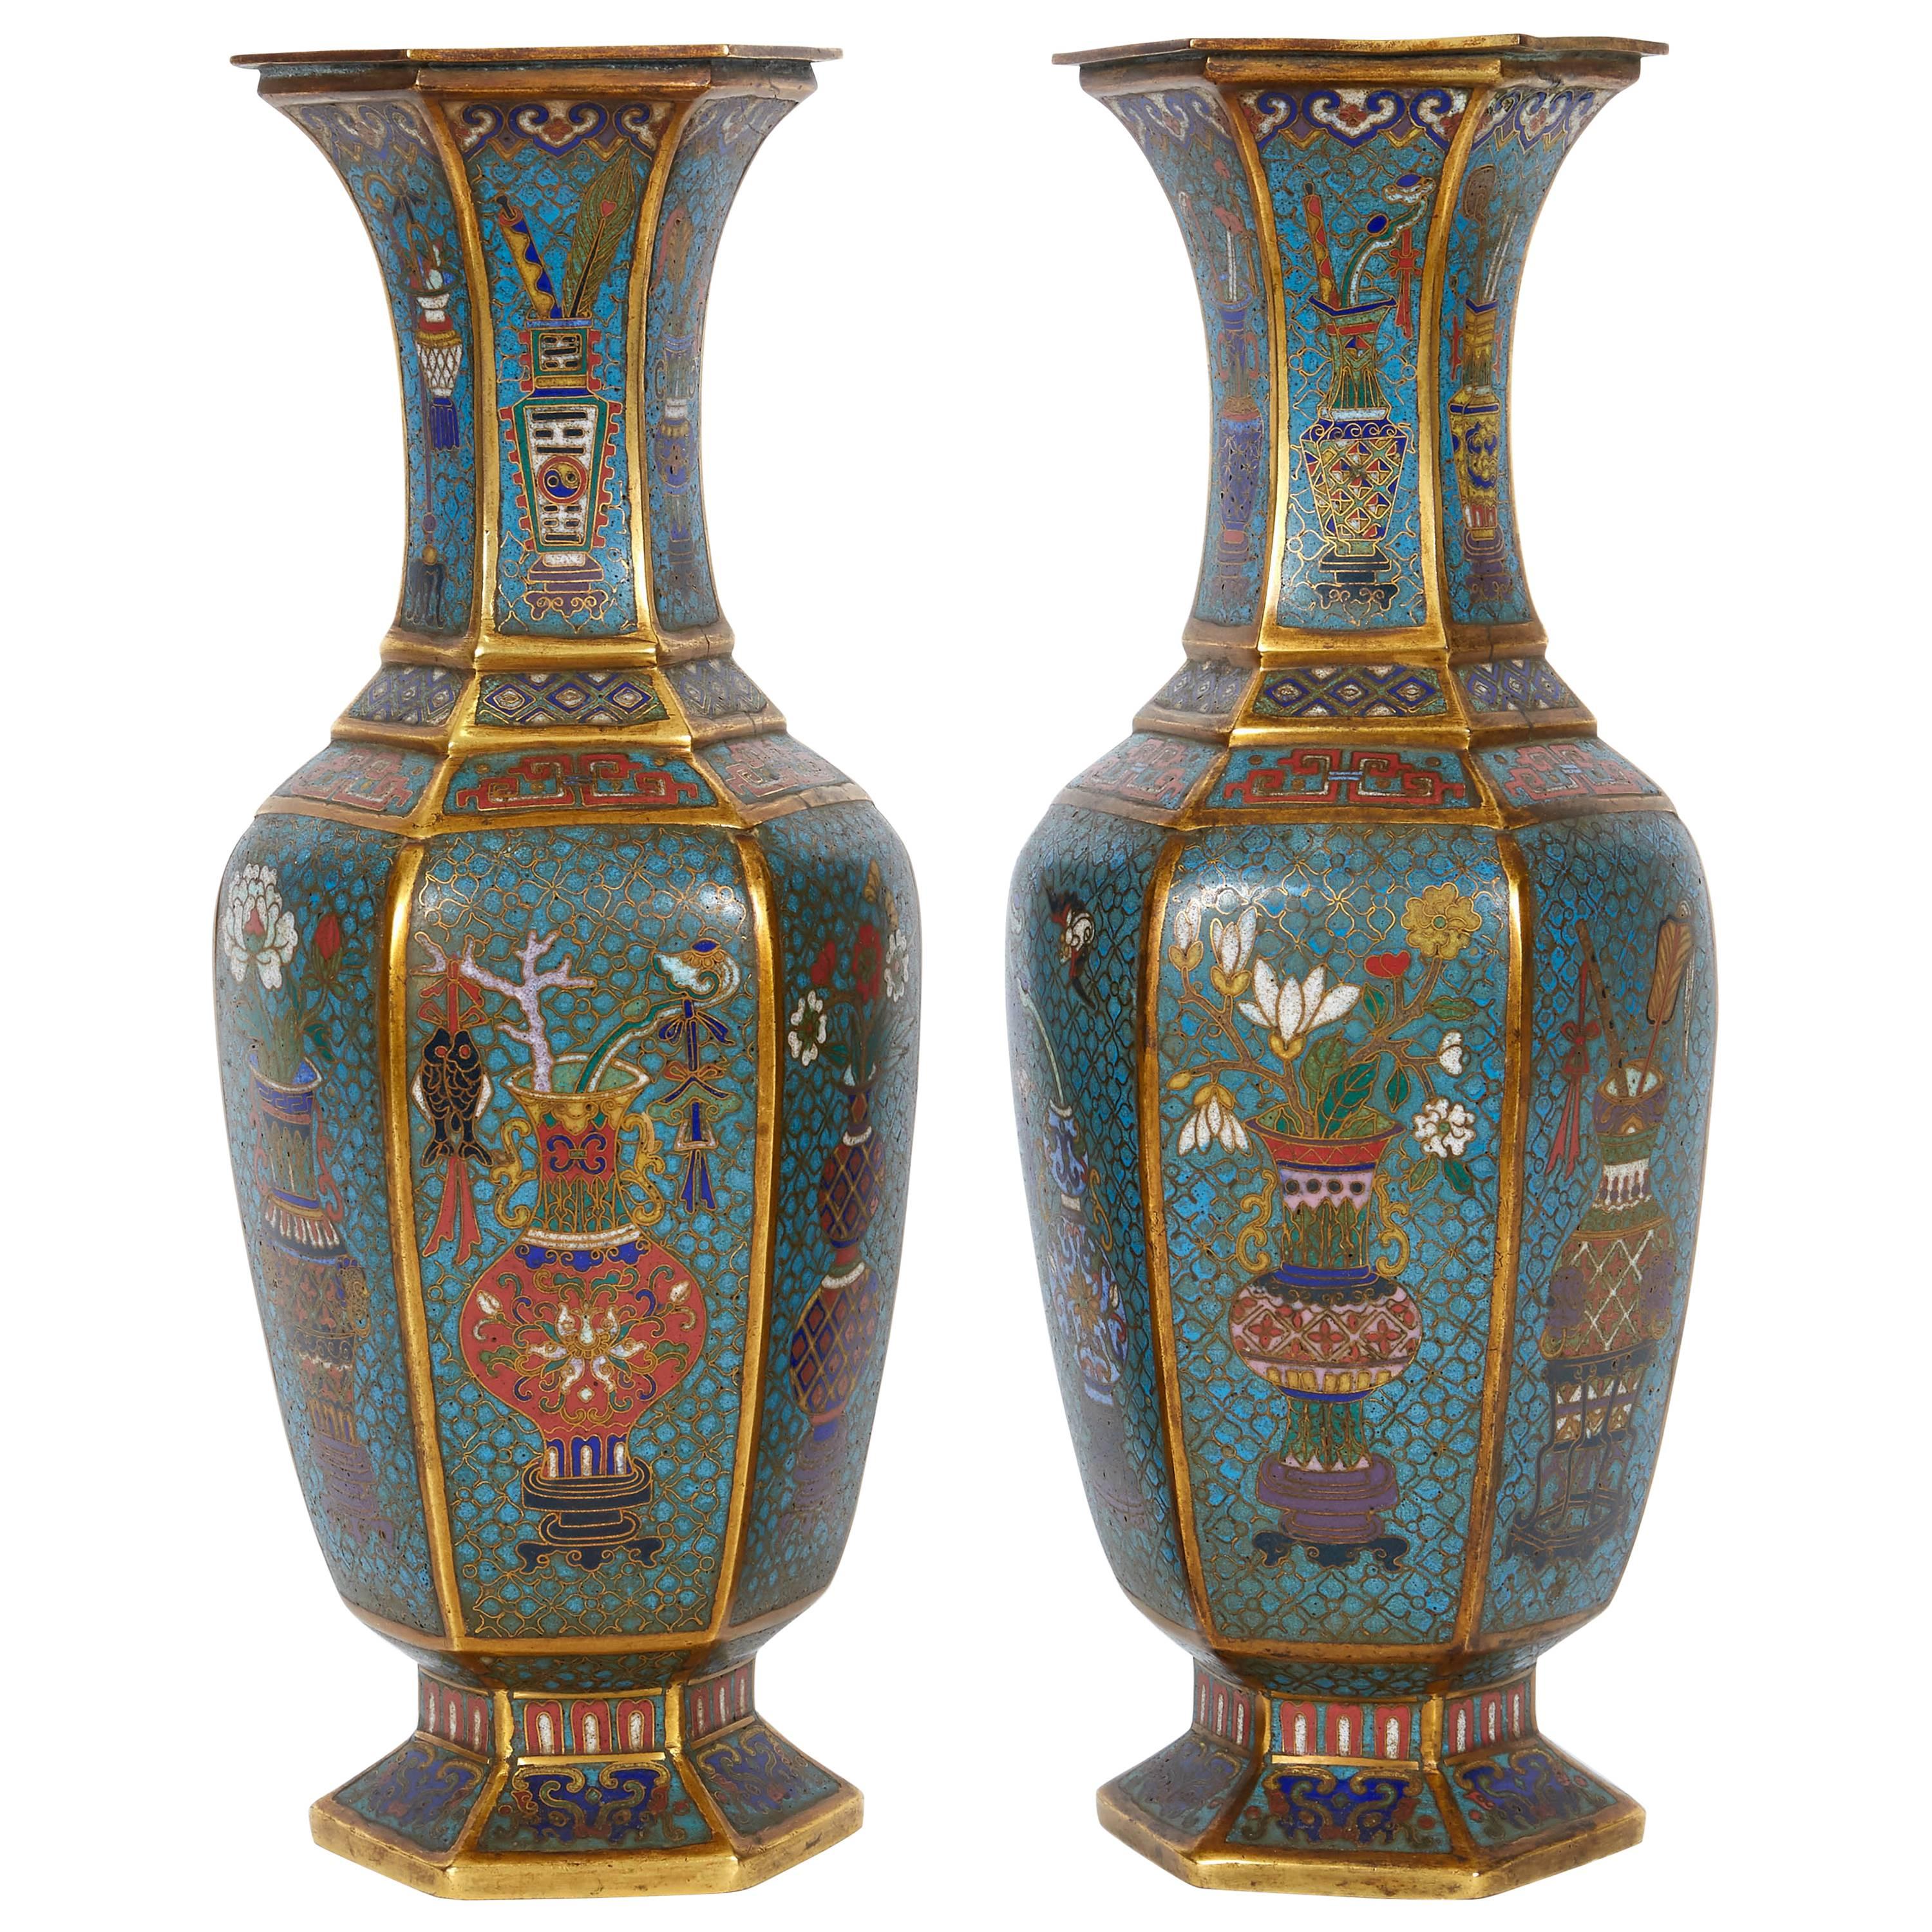 Pair of Blue Chinese Cloisonne Enamel Vases, Qing Dynasty, Qianlong Period